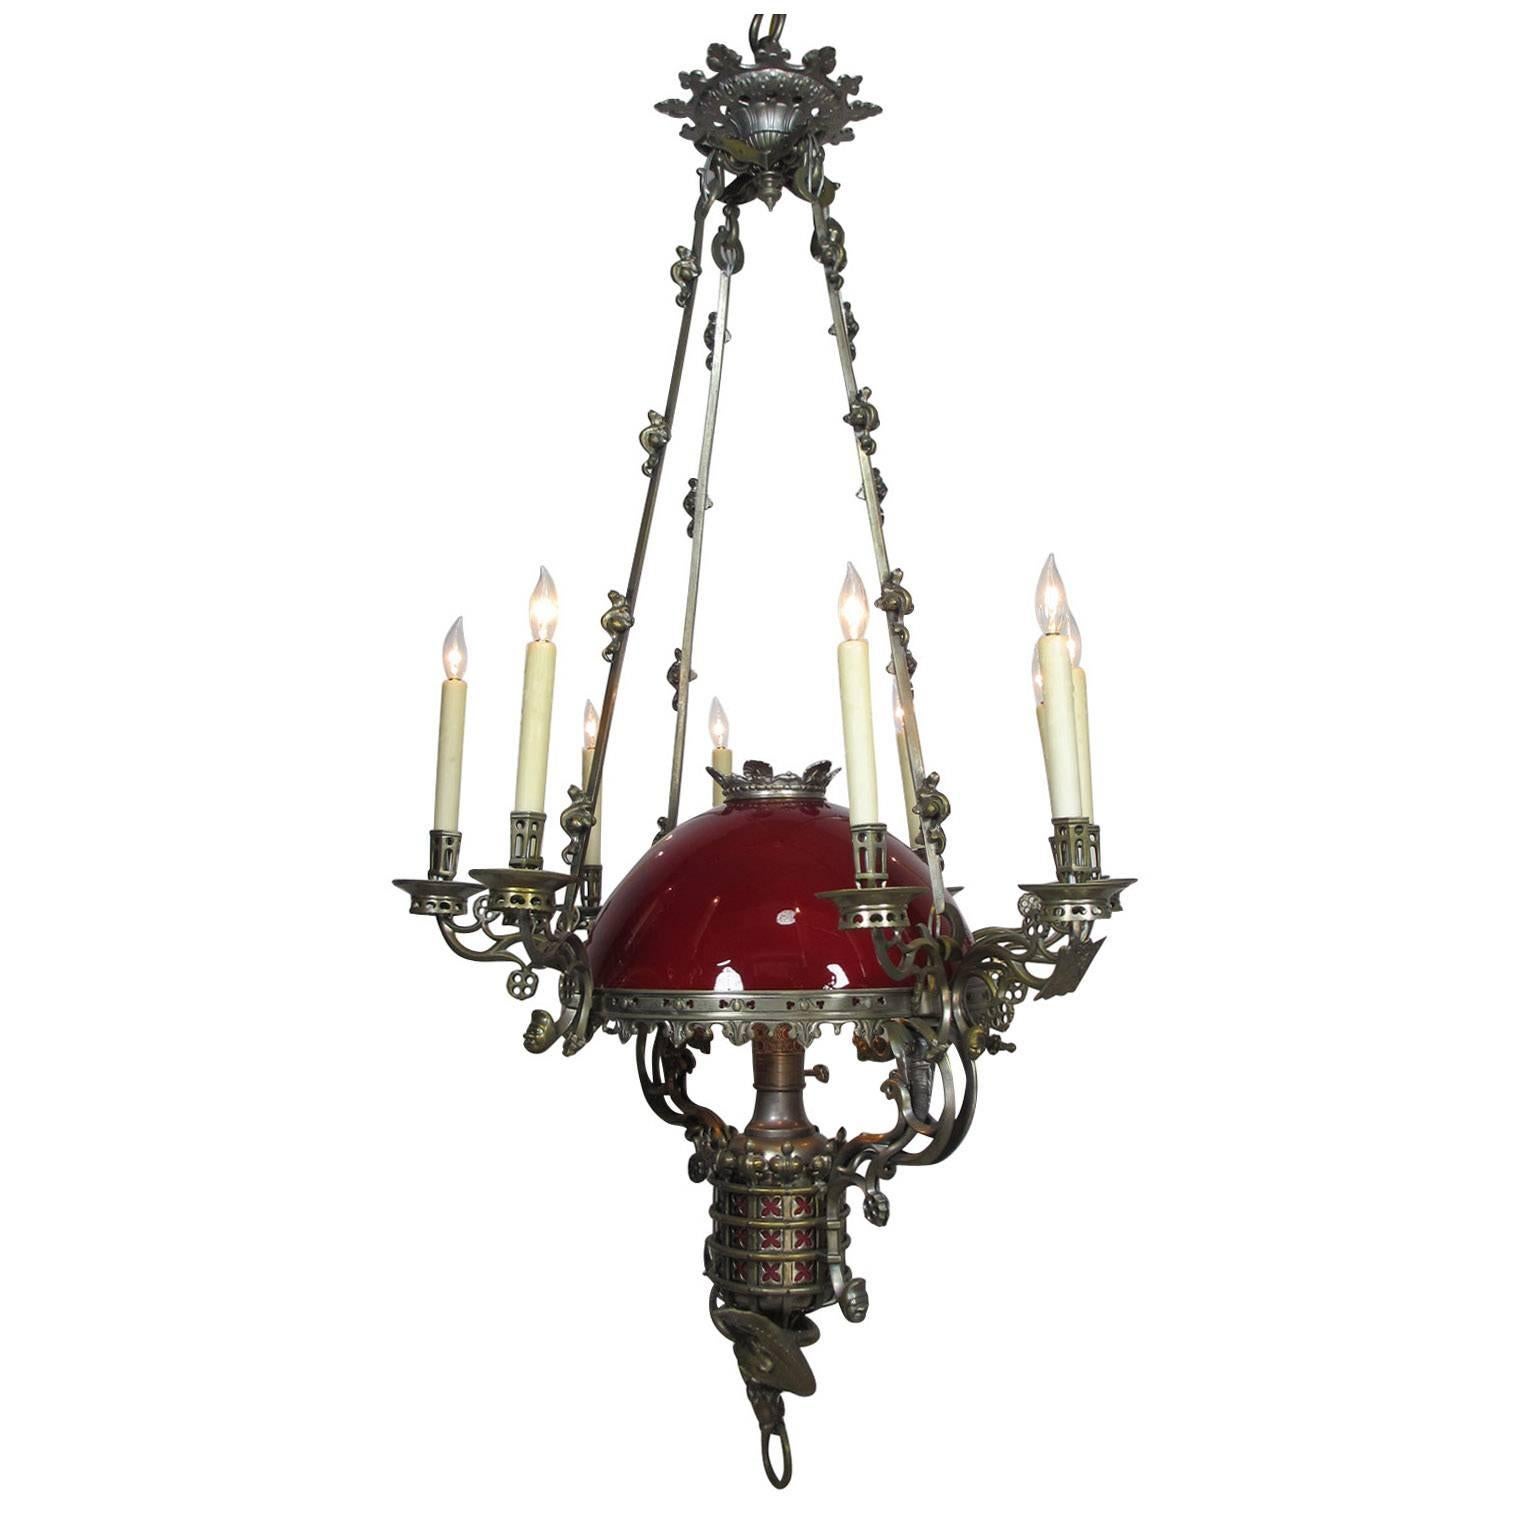 Large Anglo-French 19th-20th Century Gothic-Revival Style Figural Chandelier